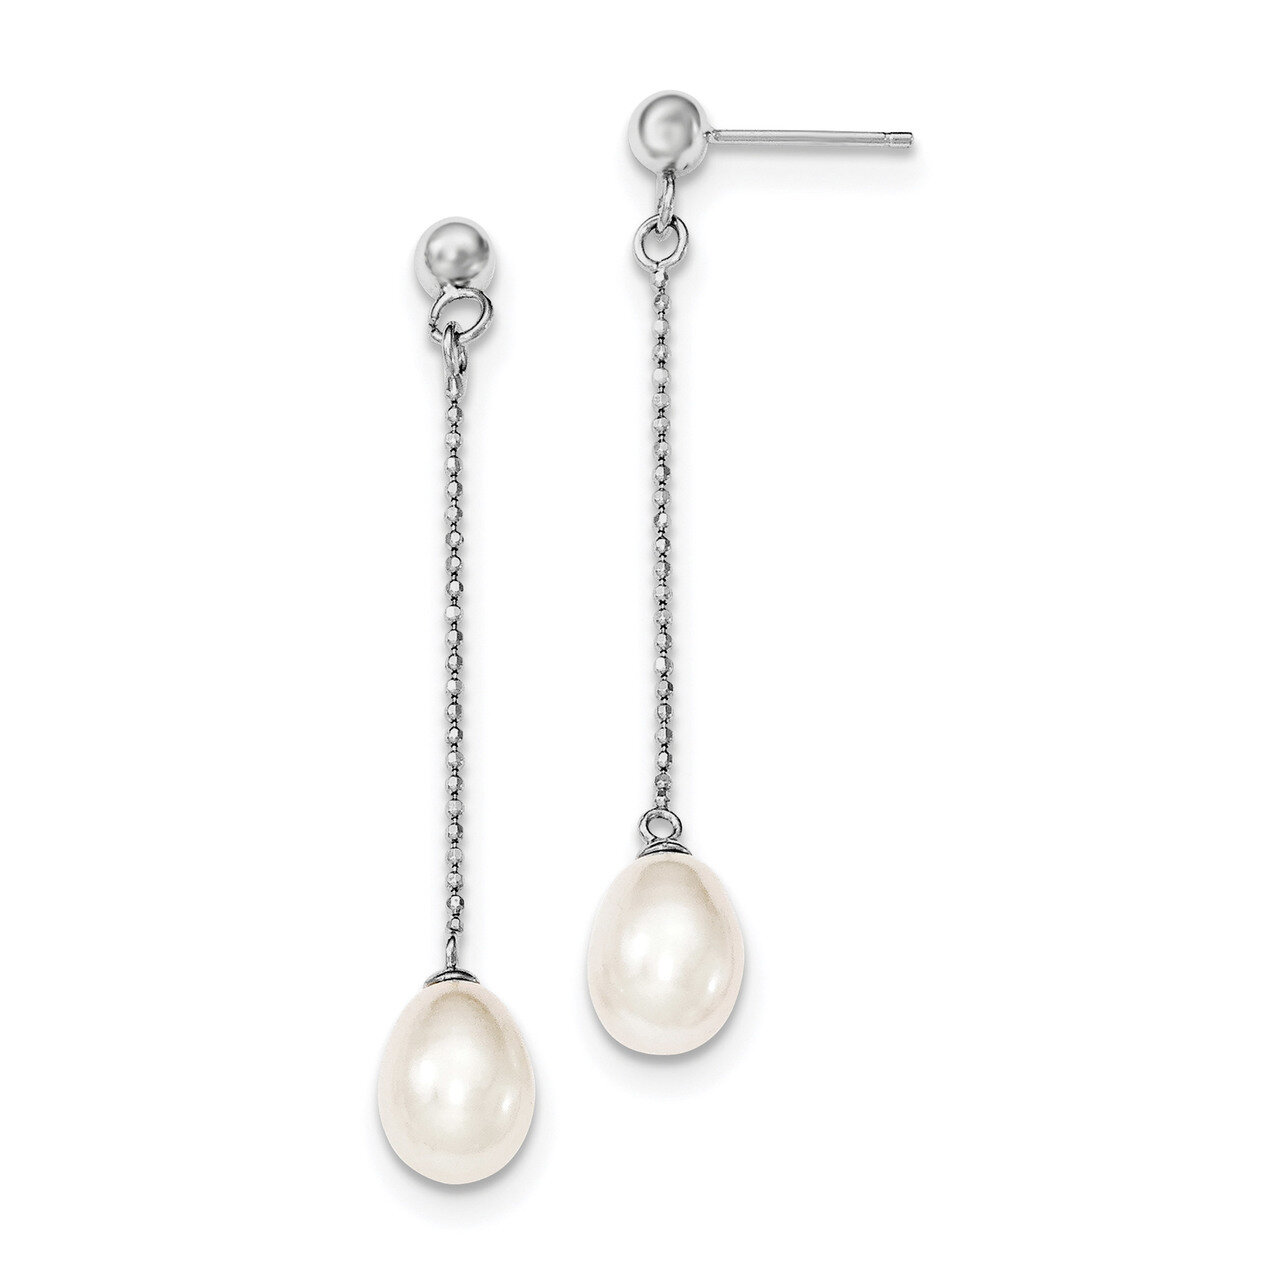 7-8mm White Cultured Freshwater Pearl Post Dangle Earrings Sterling Silver Rhodium-plated QE12776